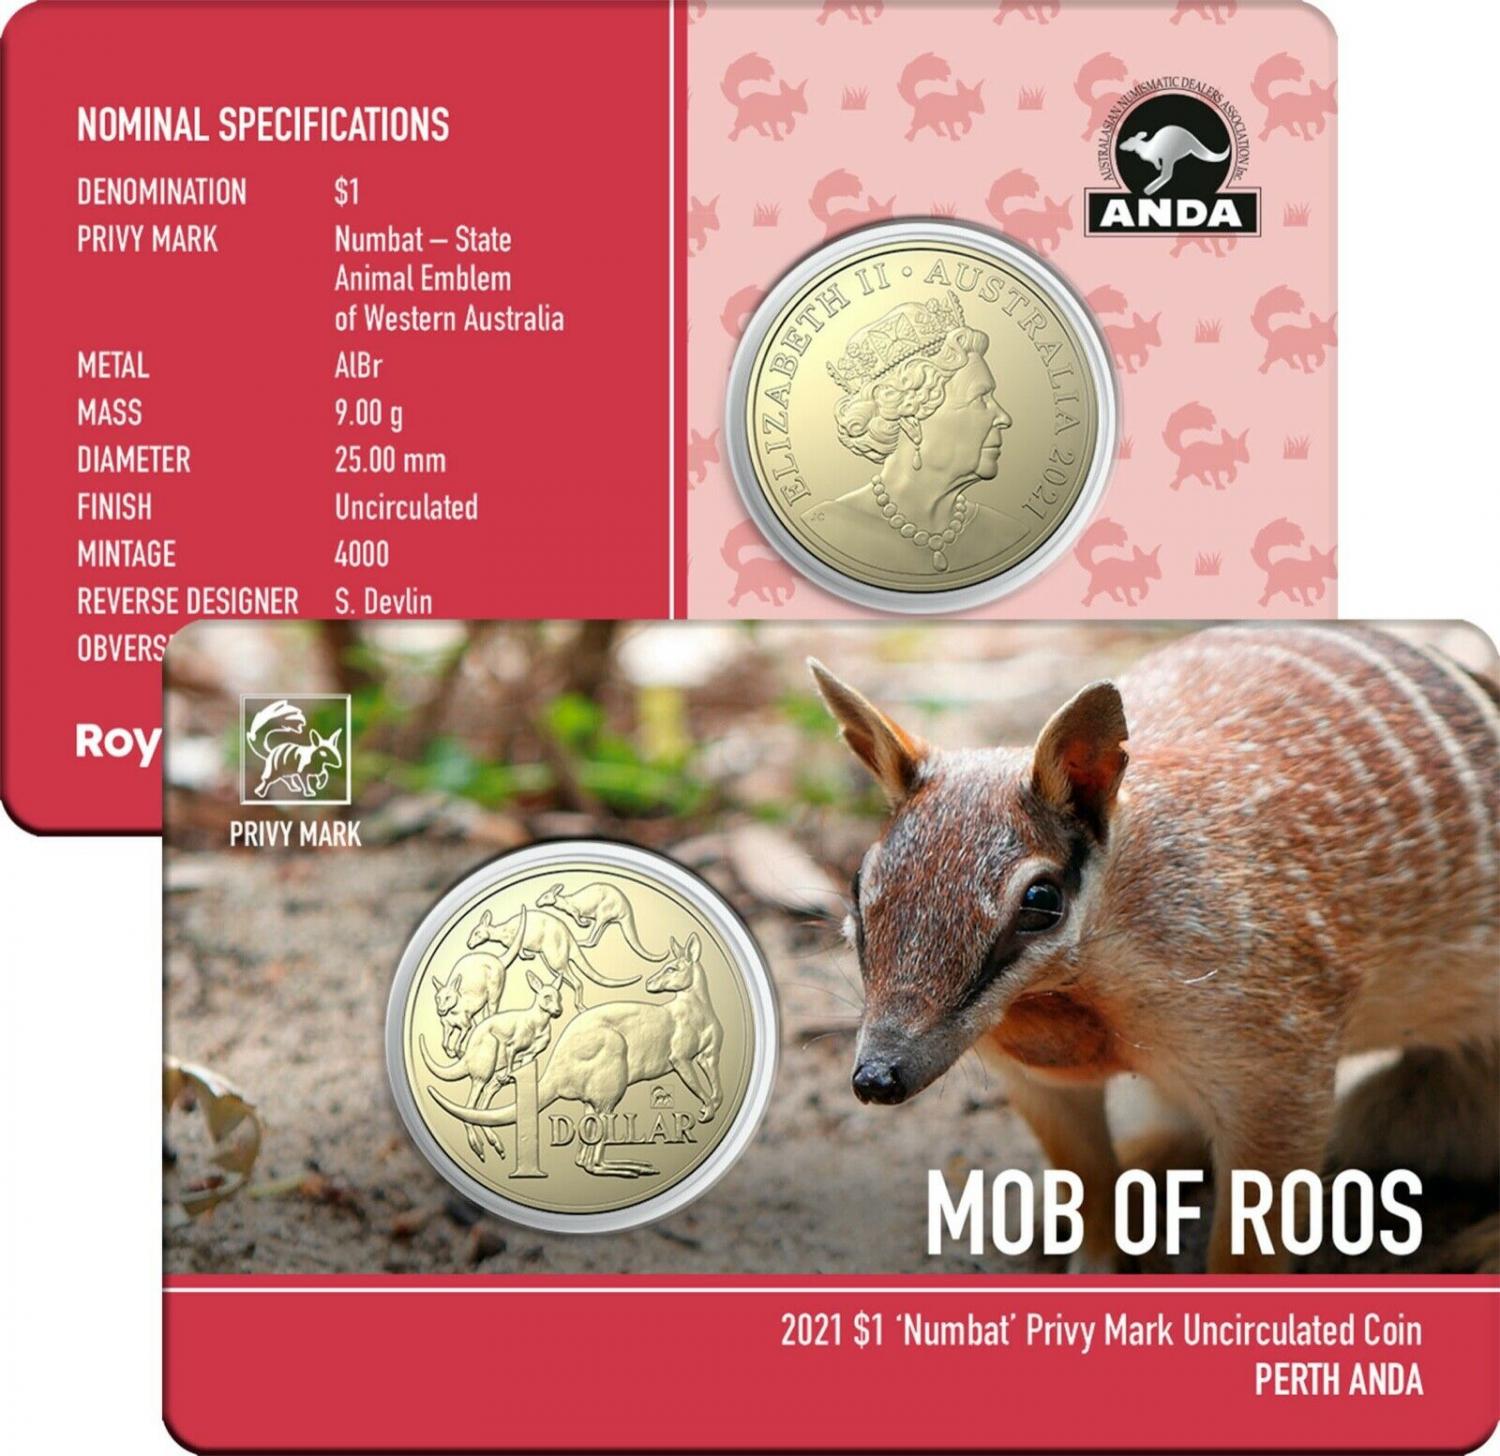 Thumbnail for 2021 Australian Mob of Roos $1 Coin - Numbat Privymark - Perth ANDA Show